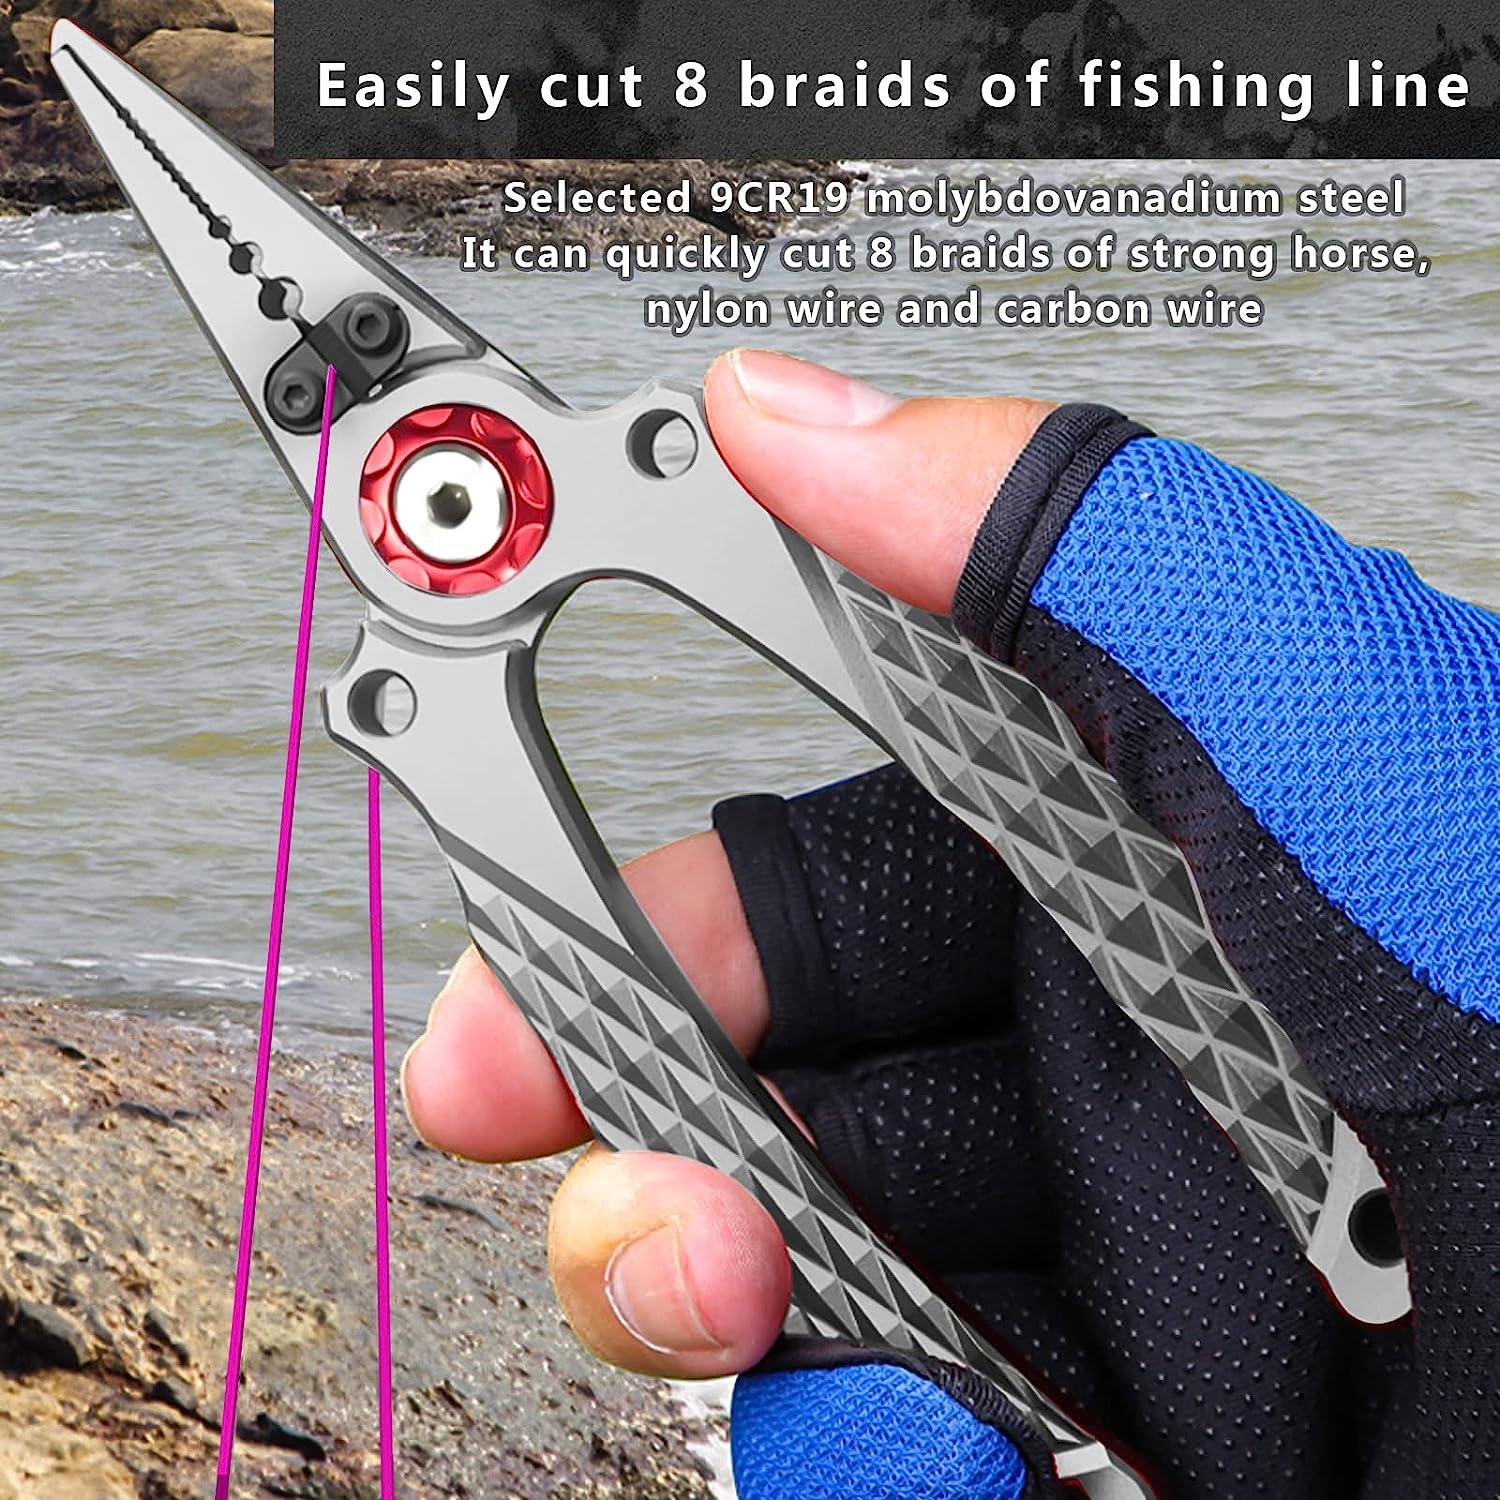 XINBOR Fishing Pliers,420 Stainless Steel Fishing Pliers kit,Fishing Pliers  Saltwater,Multi-Function Split Ring Pliers for Fishing with Sheath and  Lanyard,Braid Line Cutter,Ice Fishing Tools